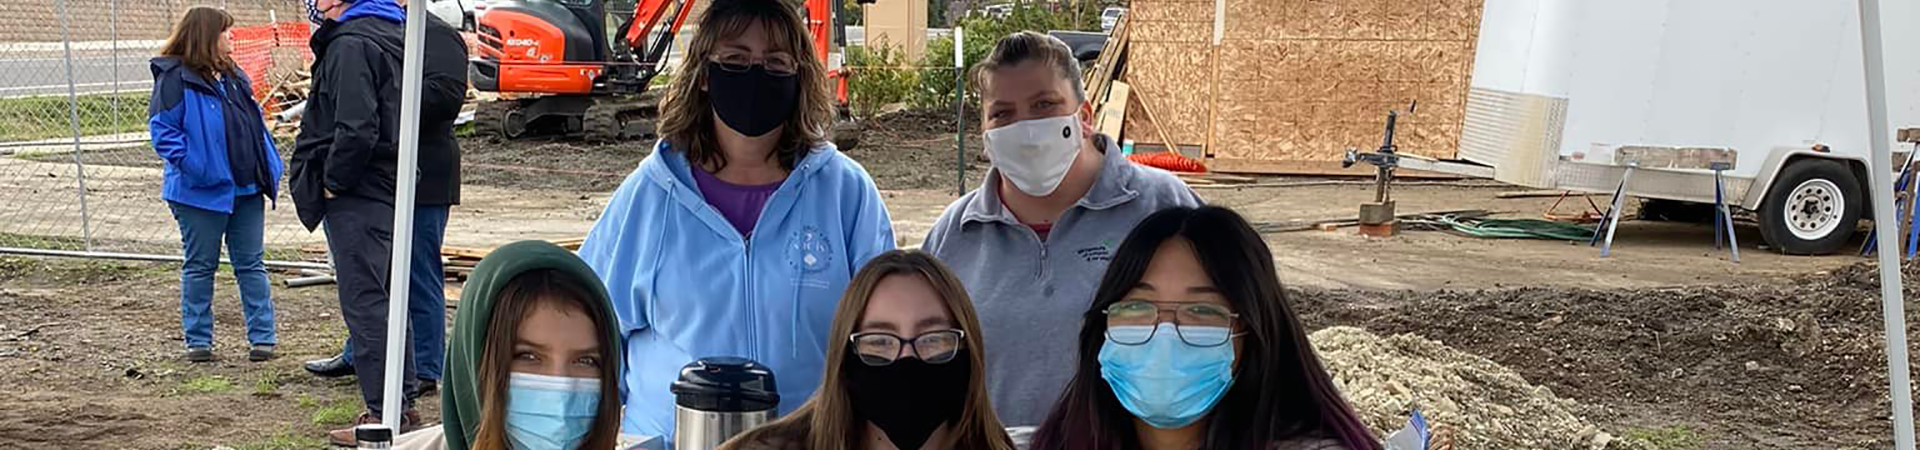  Troop  30021 wearing masks in a group photo at a job site 